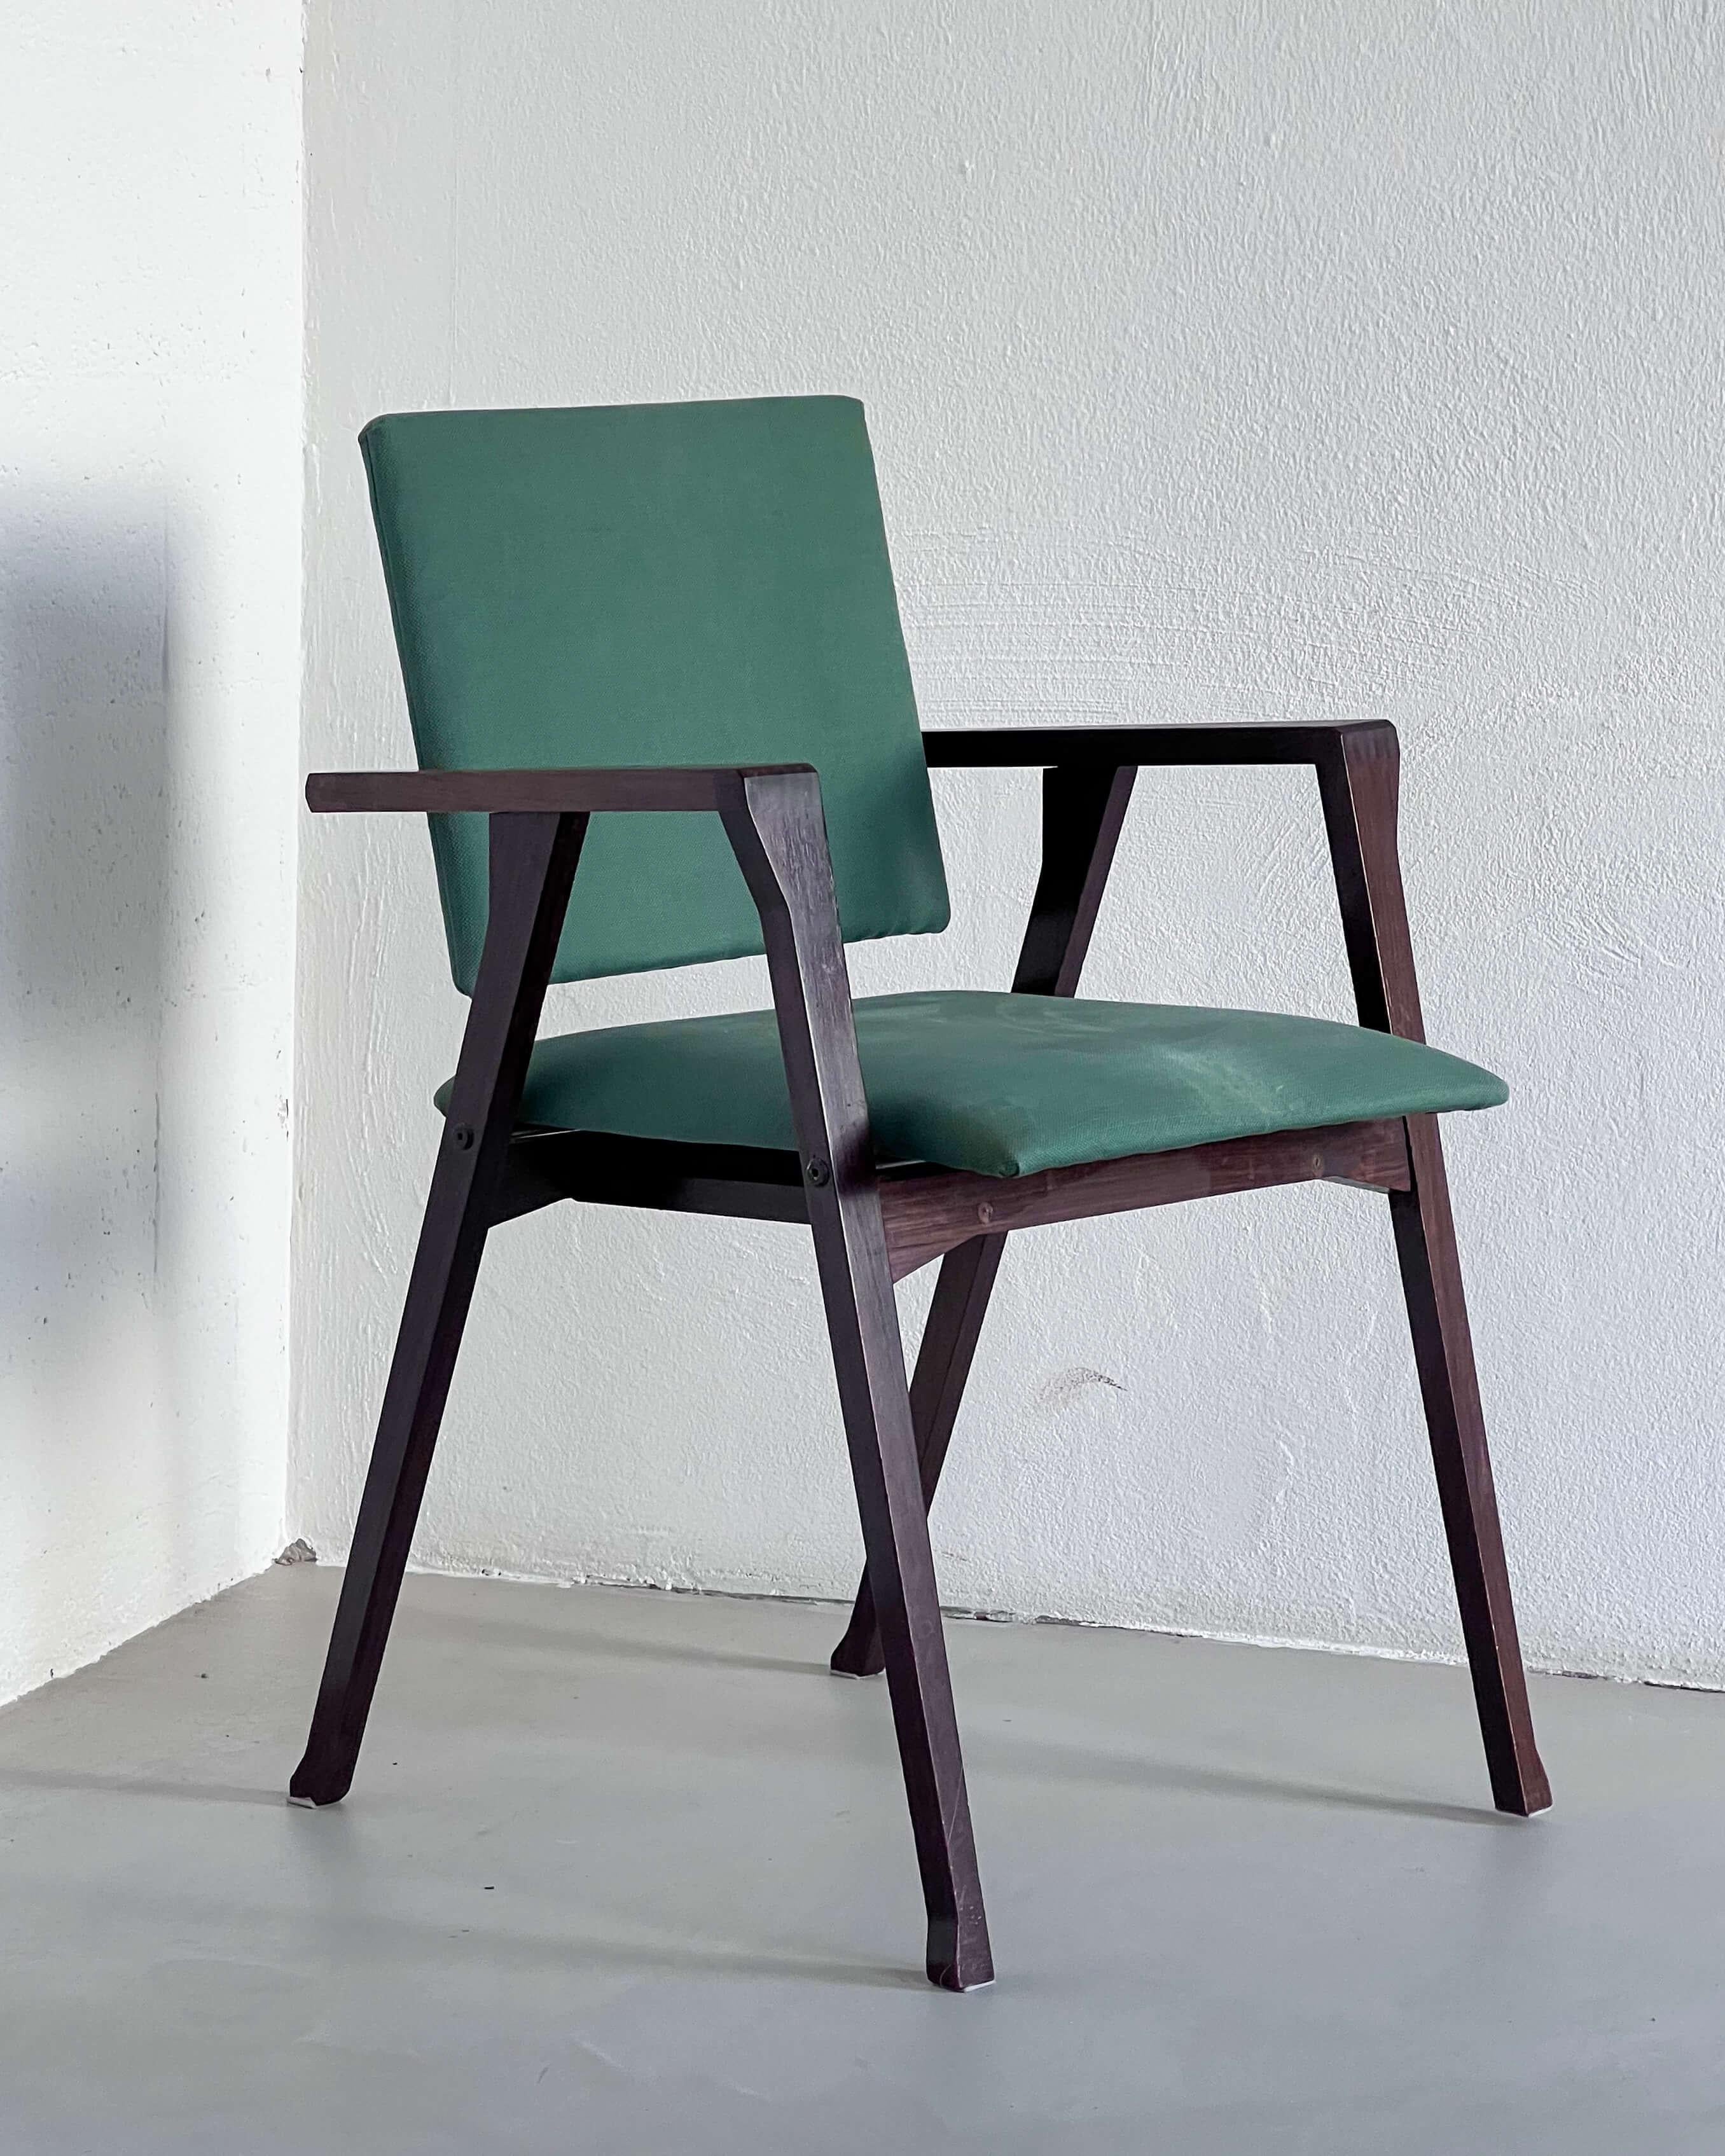 Vintage Italian Mid-Century Modern “Luisa” dining chair, designed by architect Franco Albini for Poggi, with walnut frame and original sage green fabric upholstery.

Franco Albini will be probably known to most for his countless designs. With his